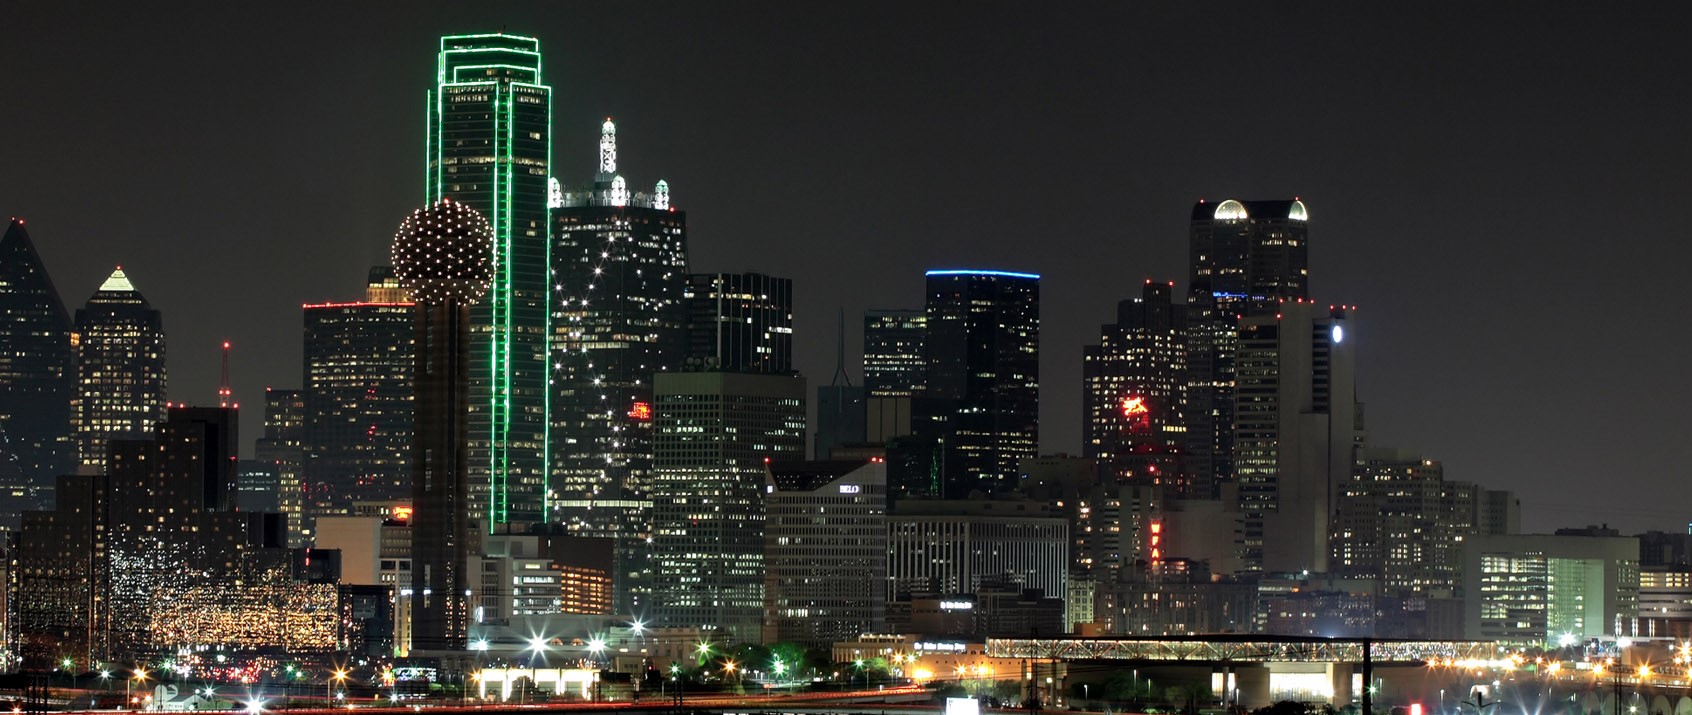 Dallas Single Family Investment Properties